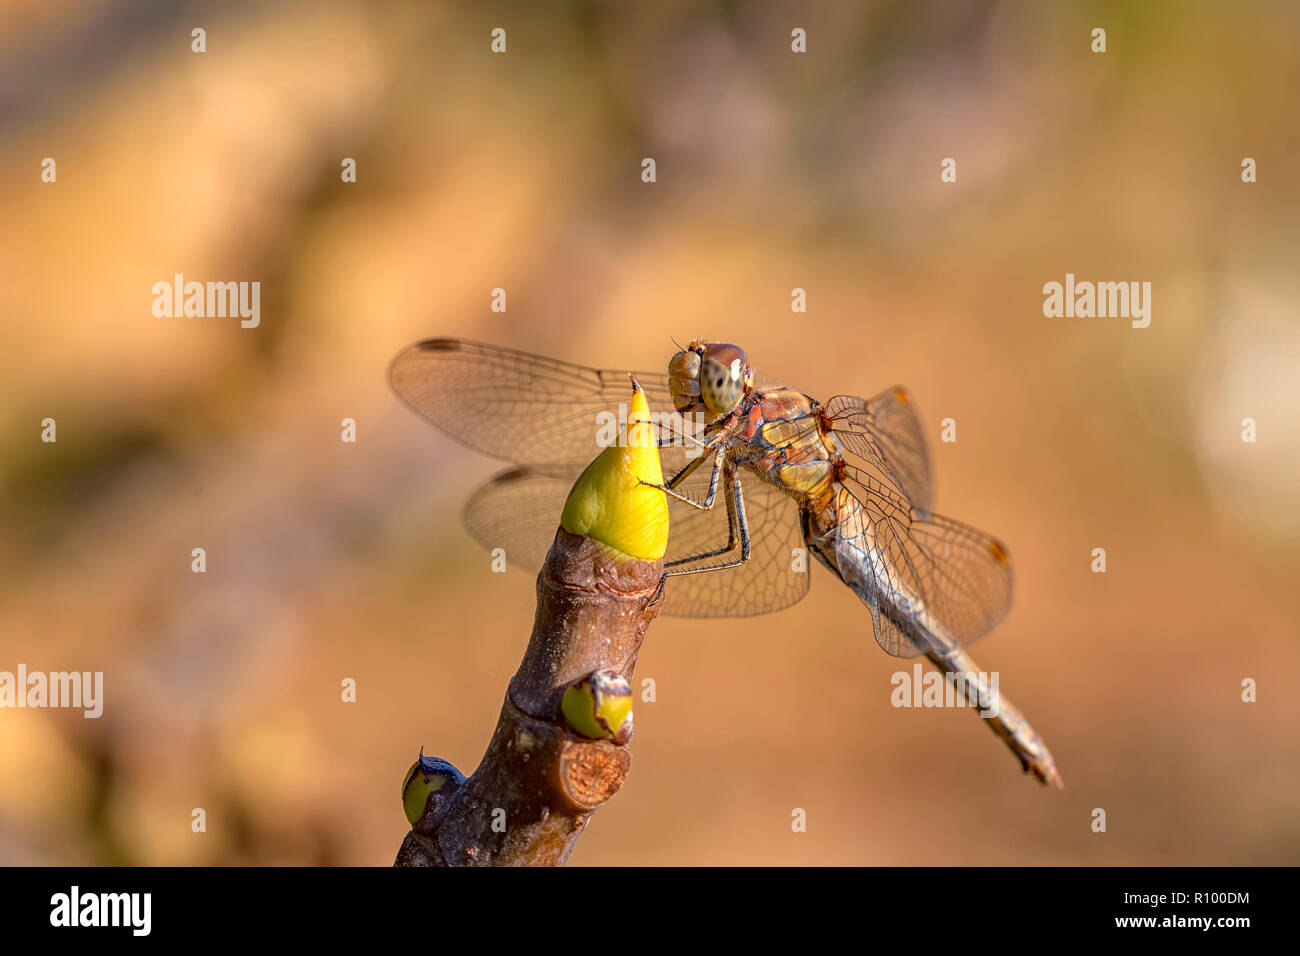 Beautiful macro of the dragonfly sitting on a twig. A dragonfly is an insect belonging to the order Odonata, infraorder Anisoptera. Stock Photo